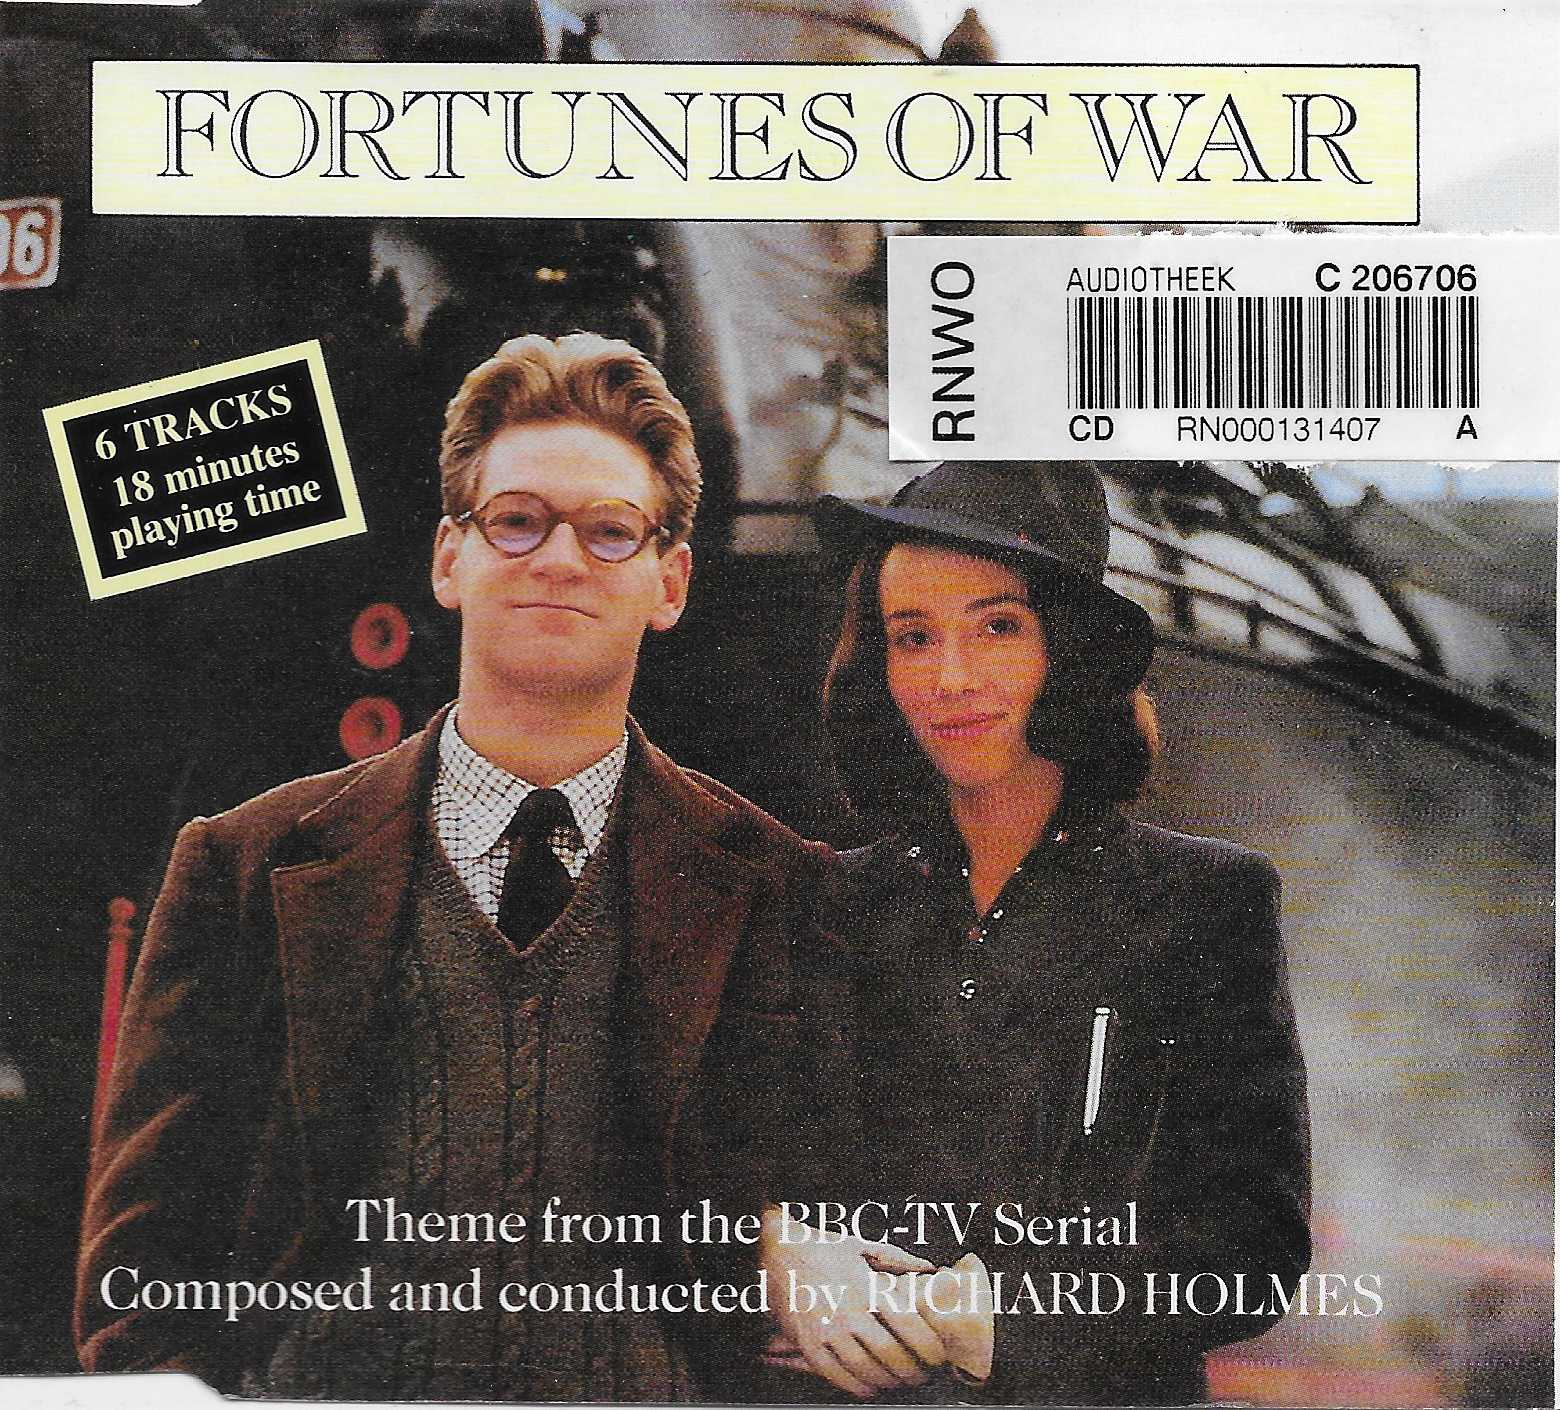 Picture of CD RSL 221 Fortunes of war - Promotional CD by artist Richard Holmes from the BBC cdsingles - Records and Tapes library